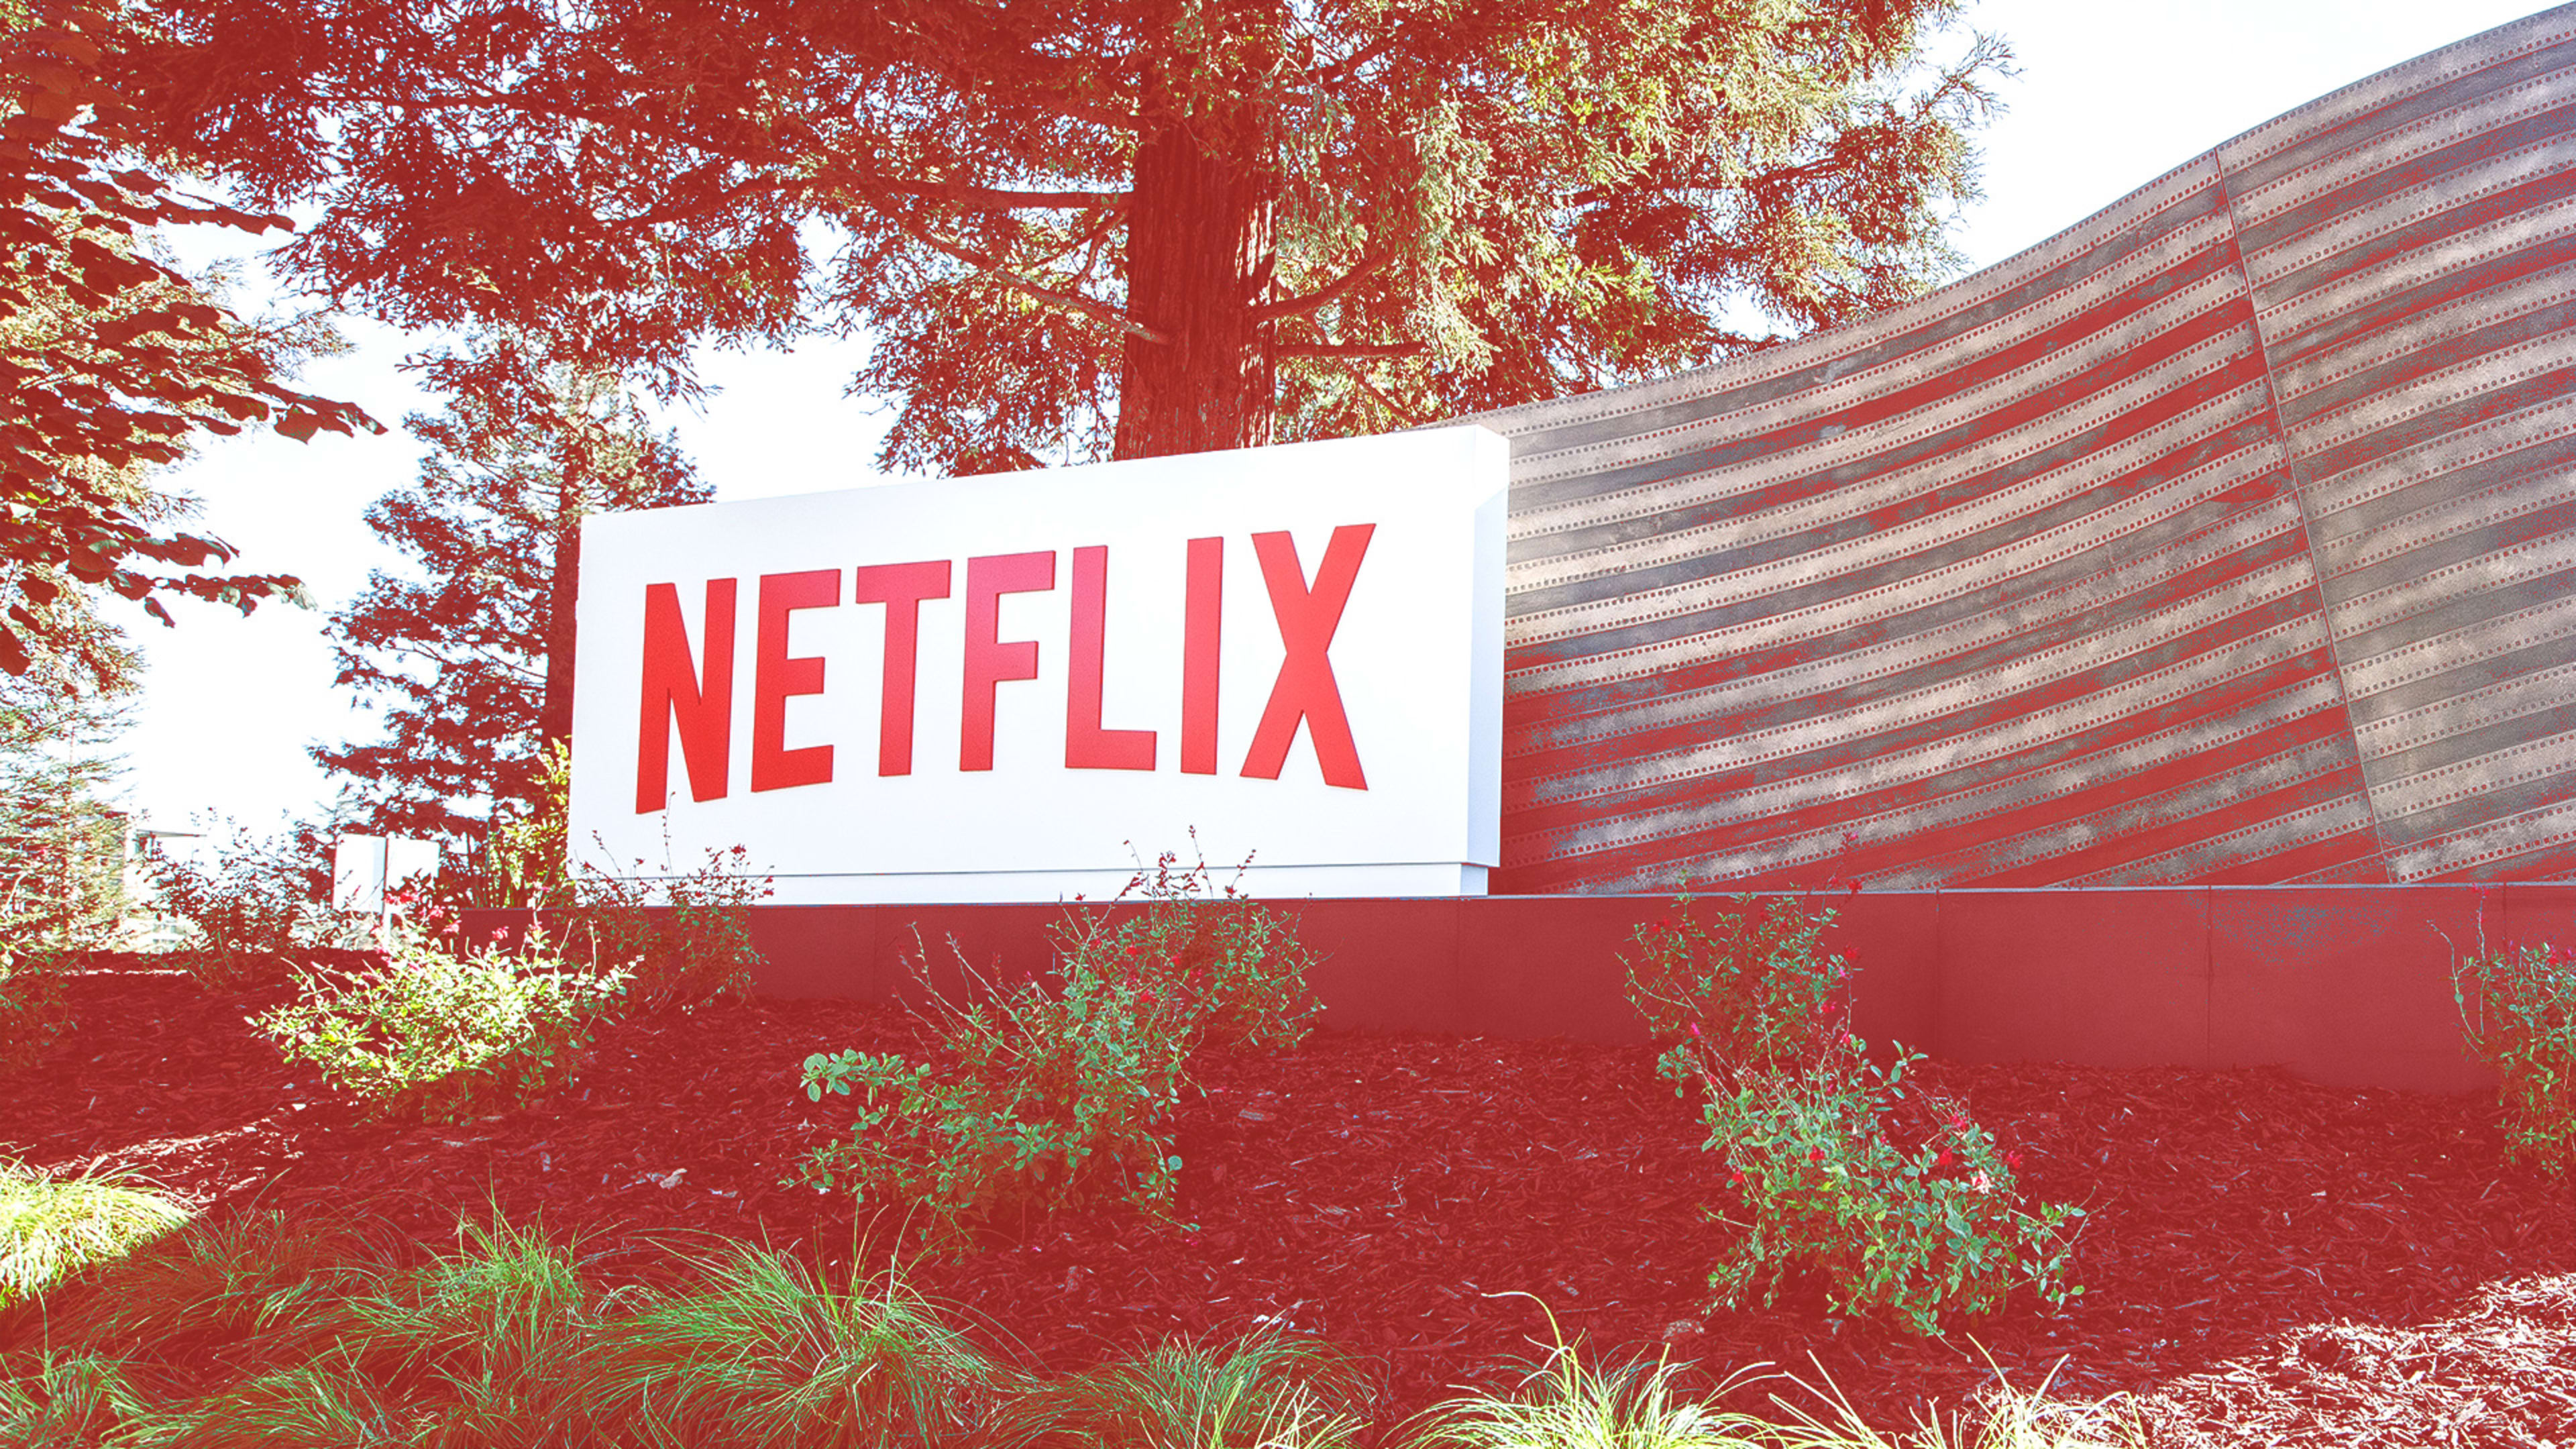 Netflix holds steady under threat from Disney and Apple, but it may be feeling the heat already